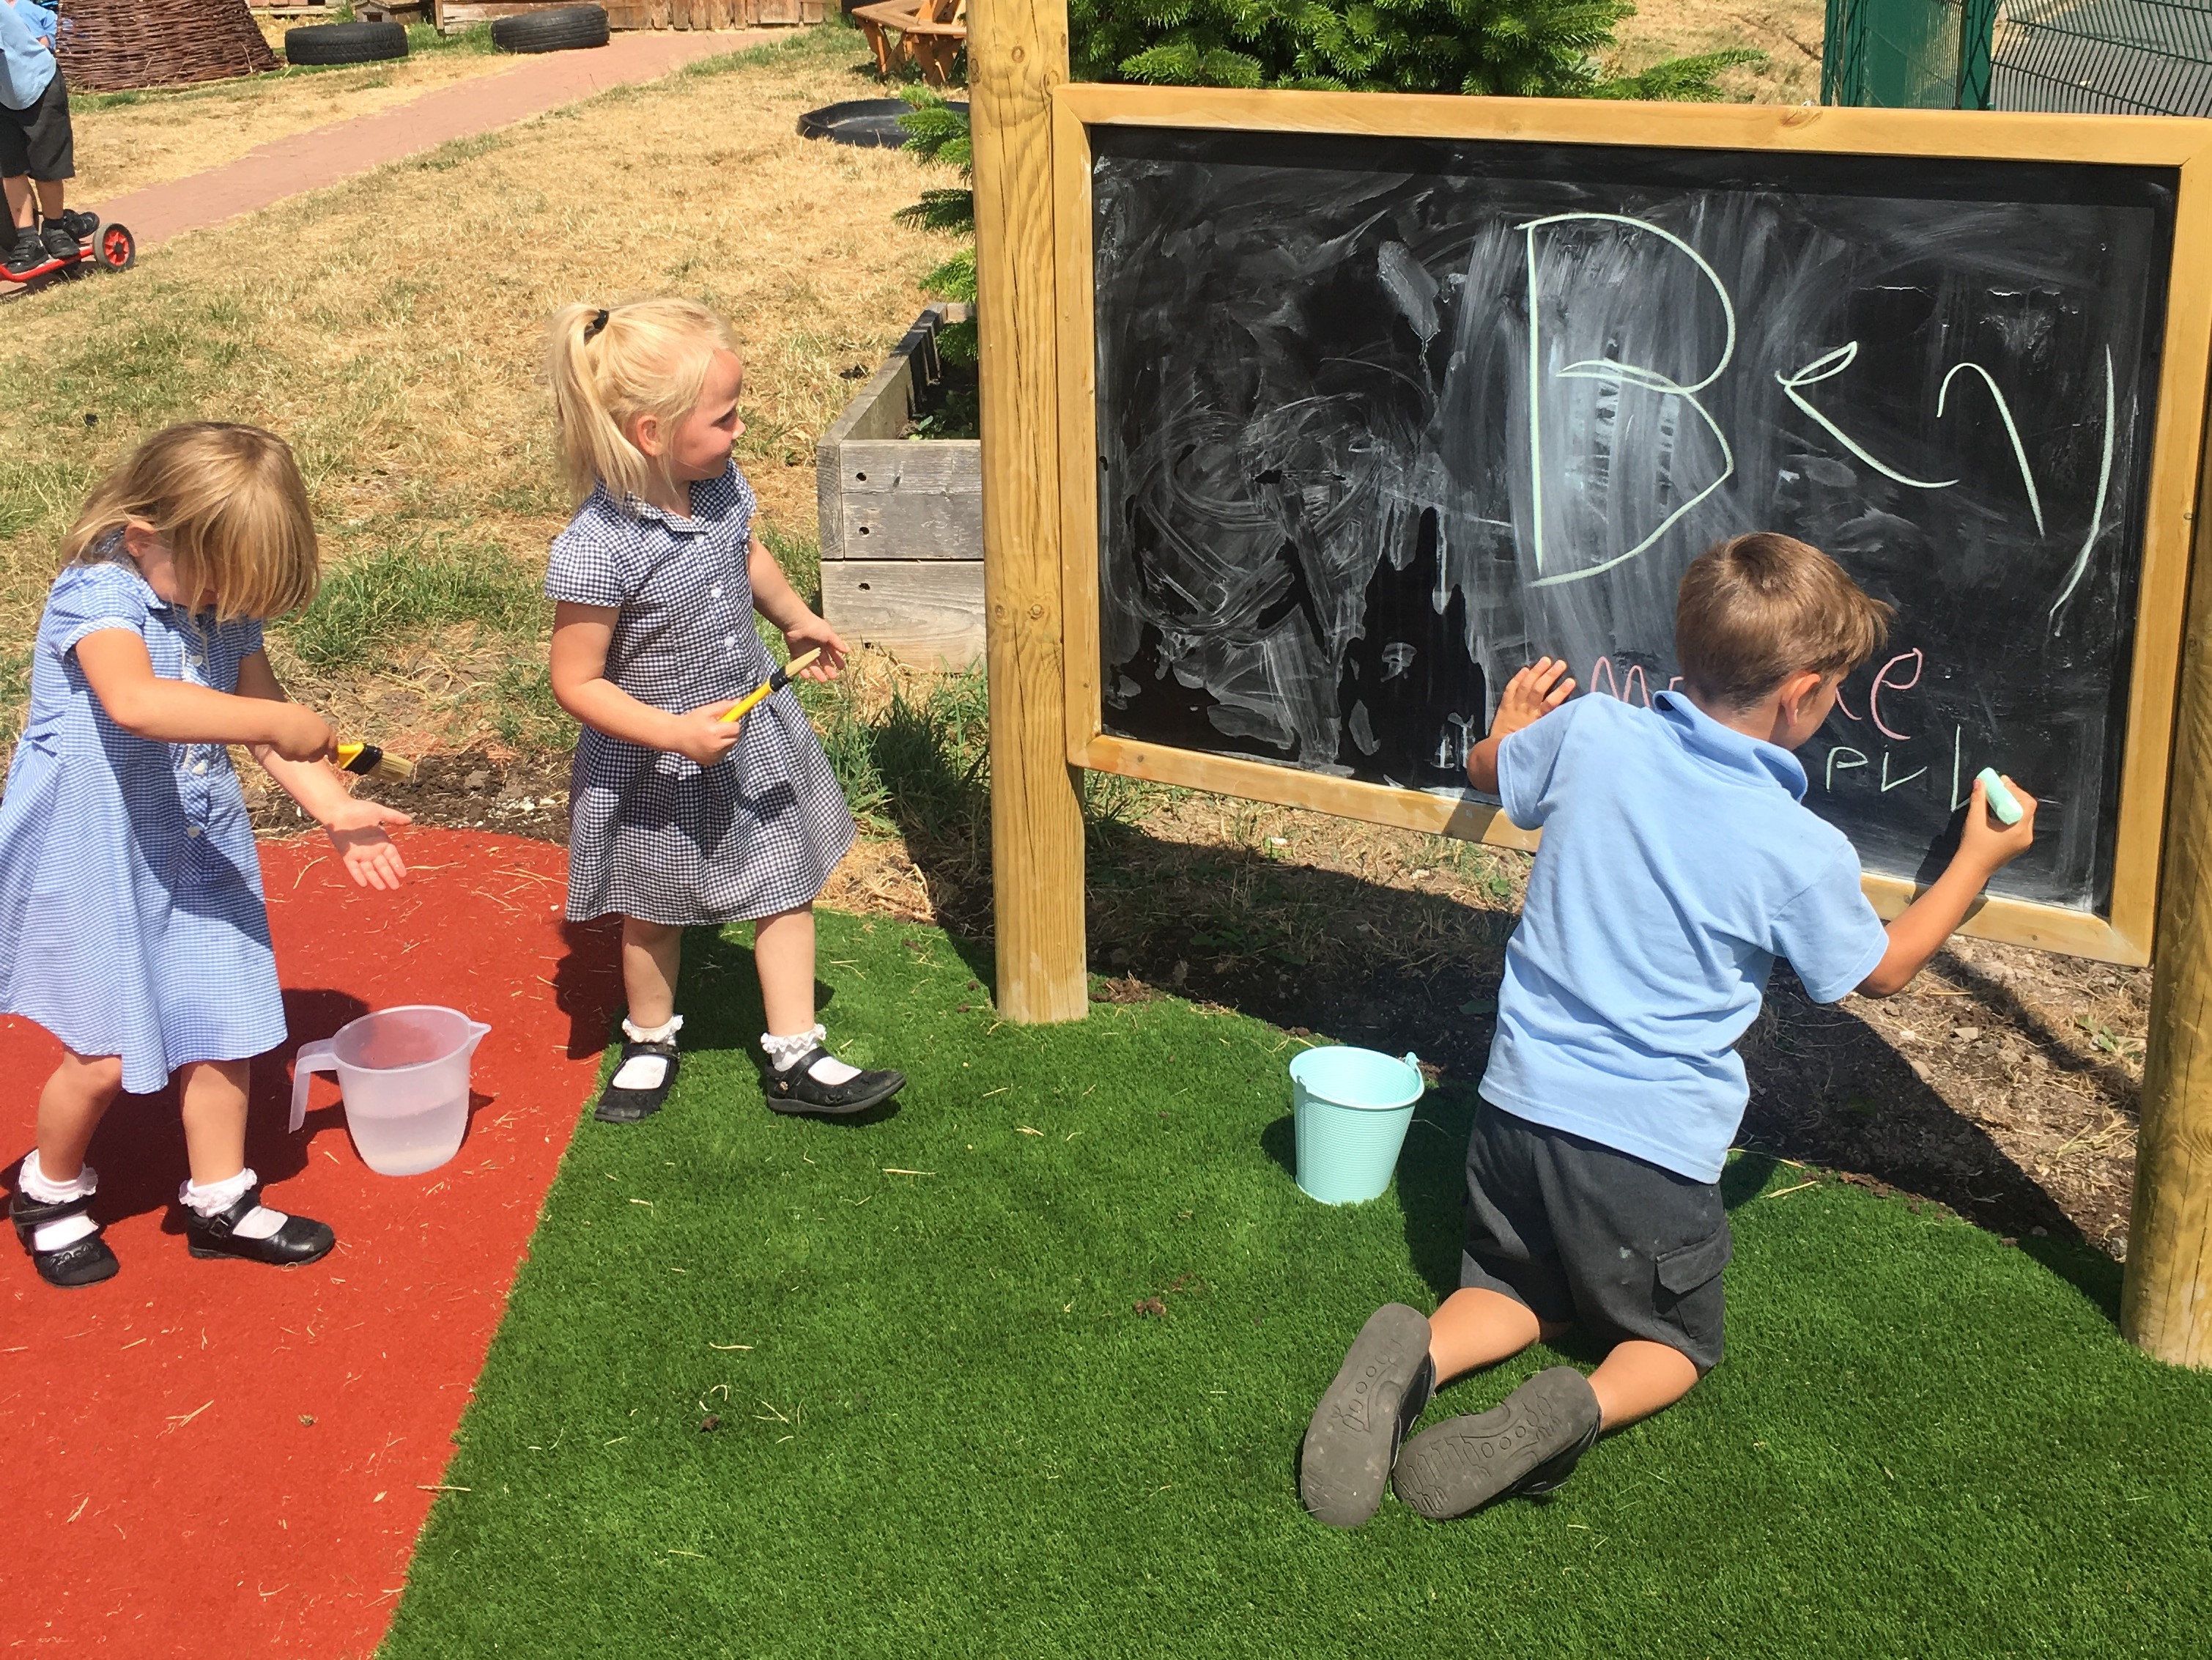 A picture of a giant chalkboard with three children engaging with the product. A boy is knelt down and is writing names on the board, which includes Ben. The two girls are putting water on brushes and are cleaning the chalkboard clean from marks.